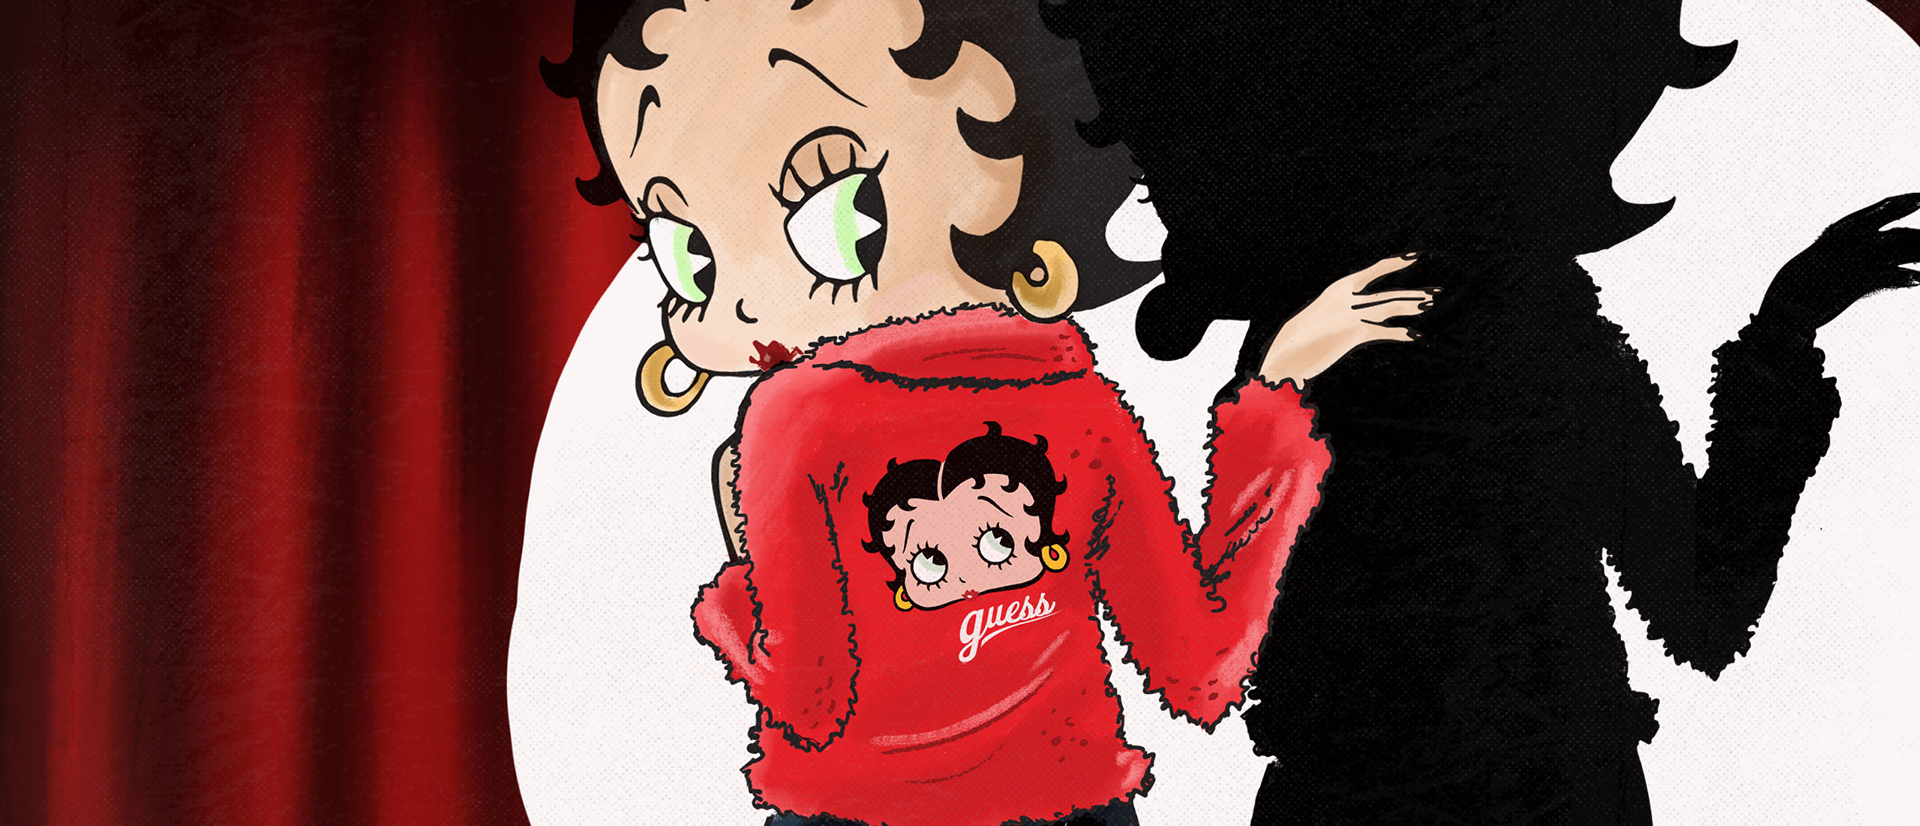 Betty Boop Illustration with red jacket